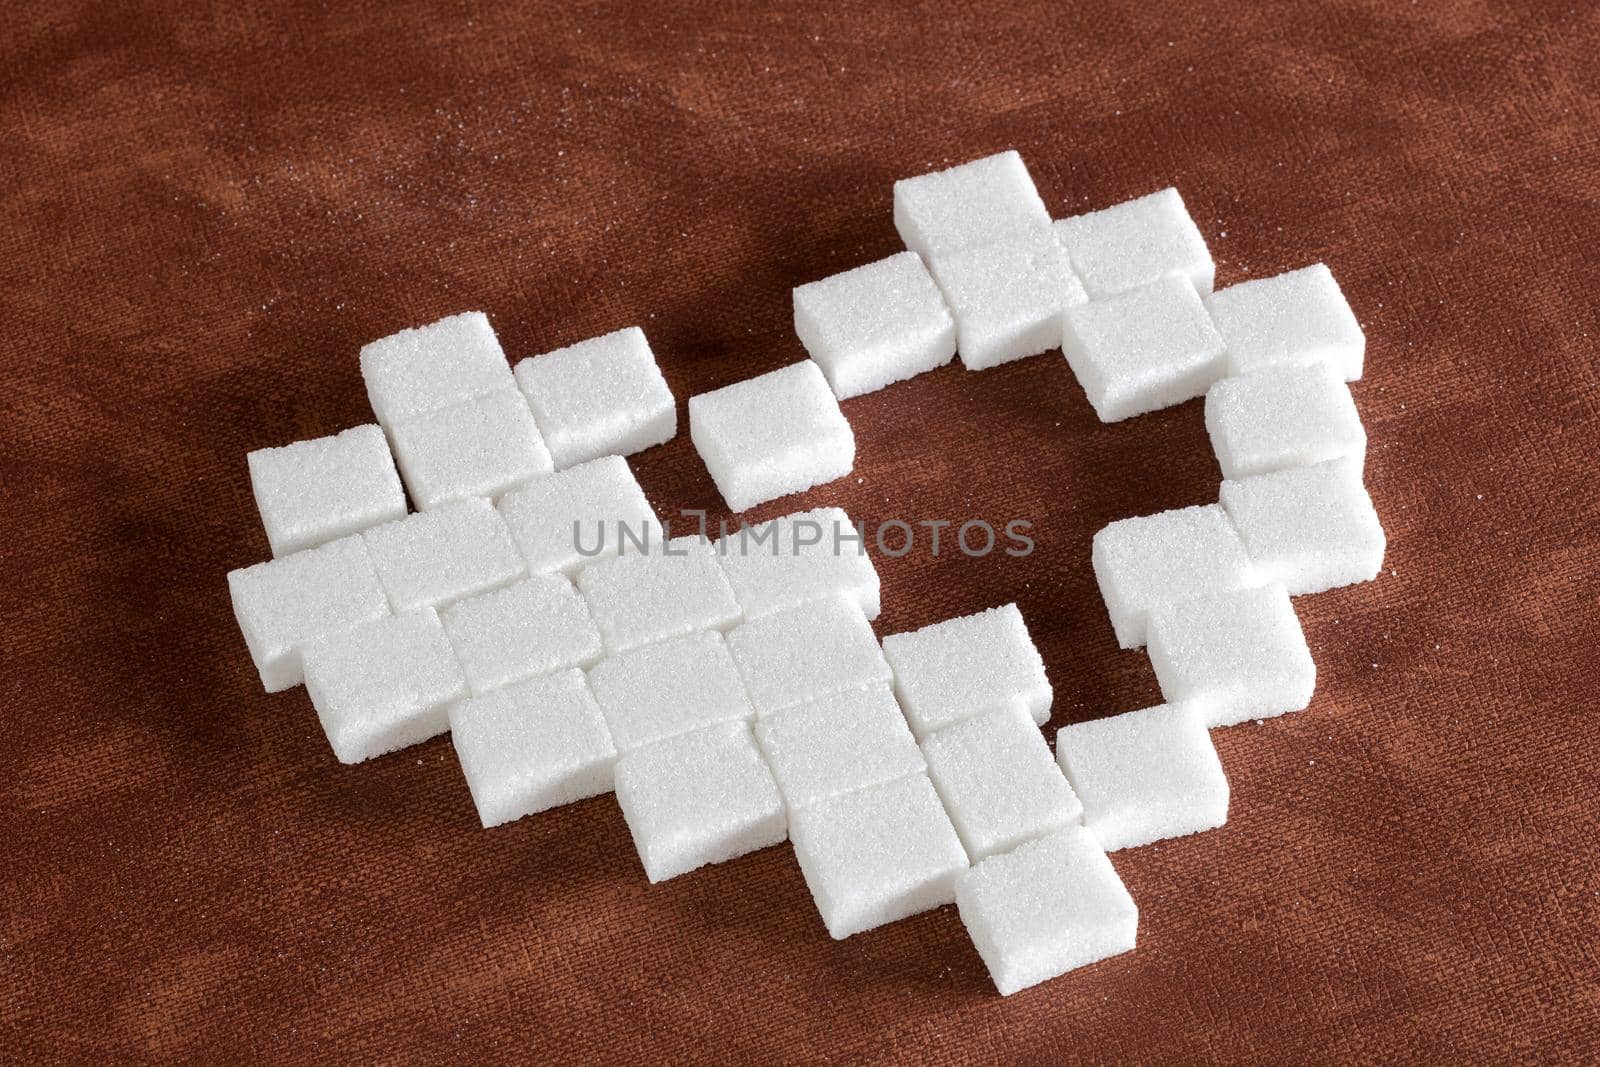 Sweet cute heart made of sugar cubes on brown natural background texture, love,sweets,candy,sugar,food concept modern design with hole